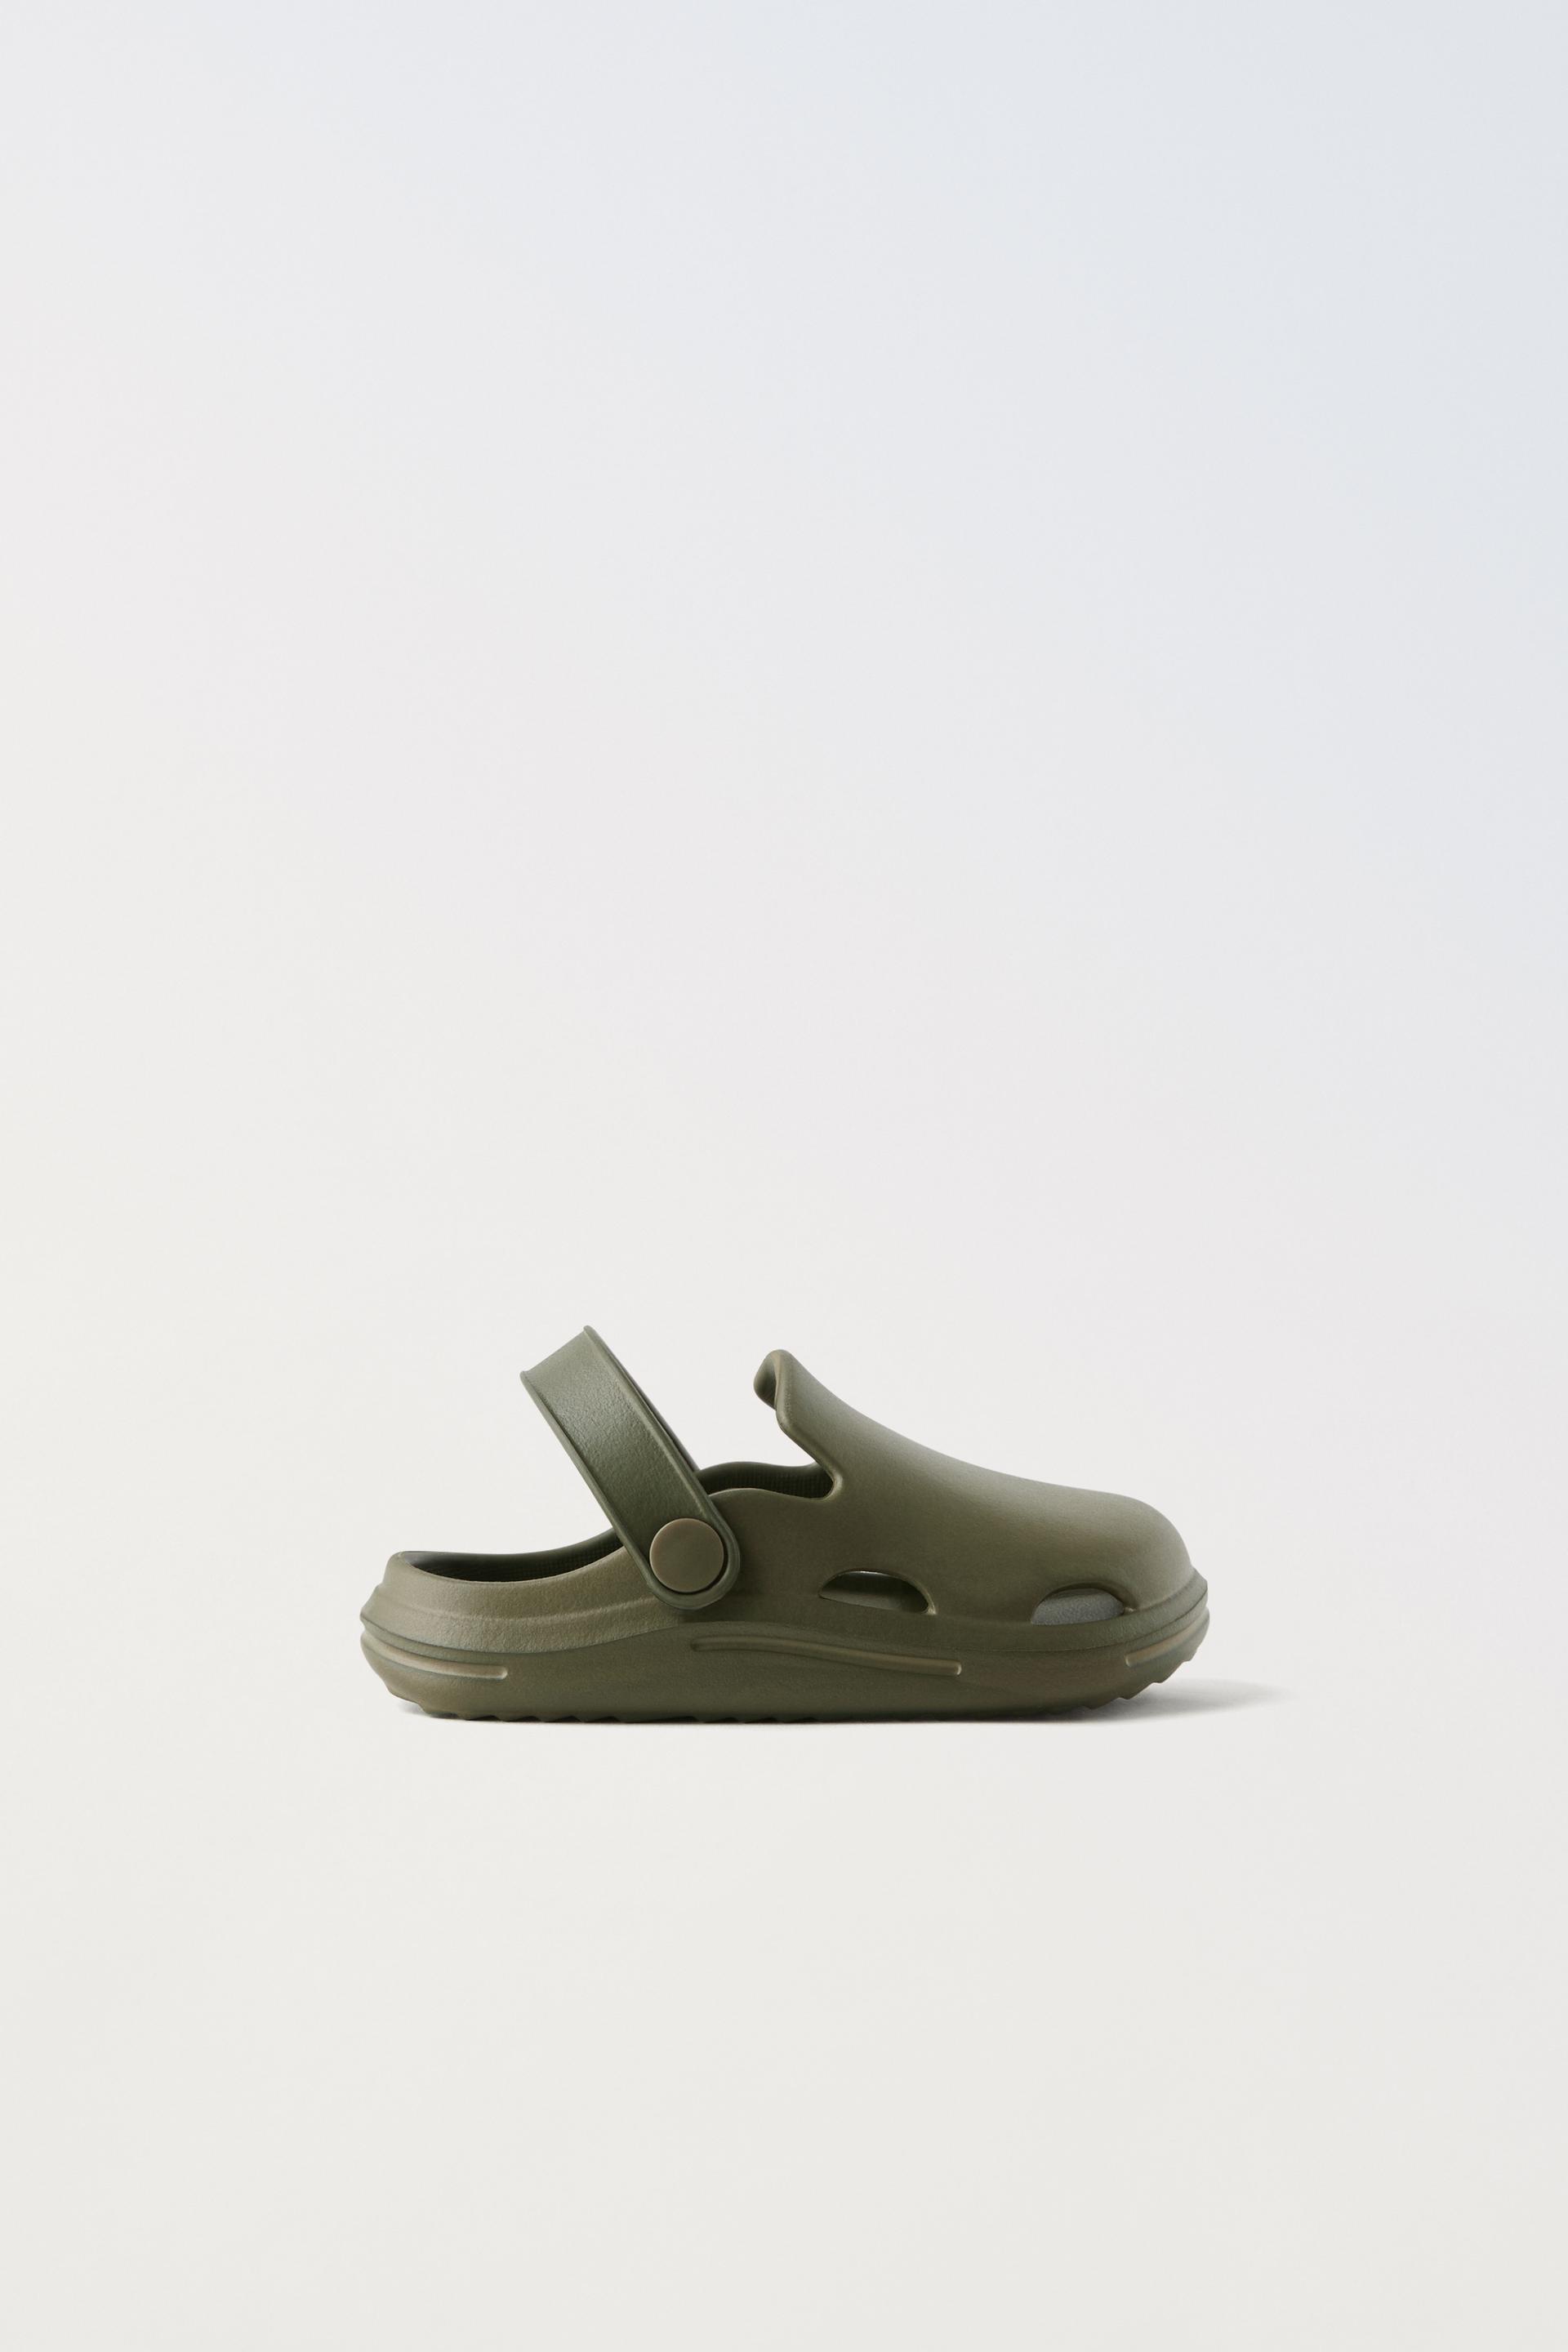 Rubber pool clogs. Back elastic strap for a better fit. Rubber soles. ZARA